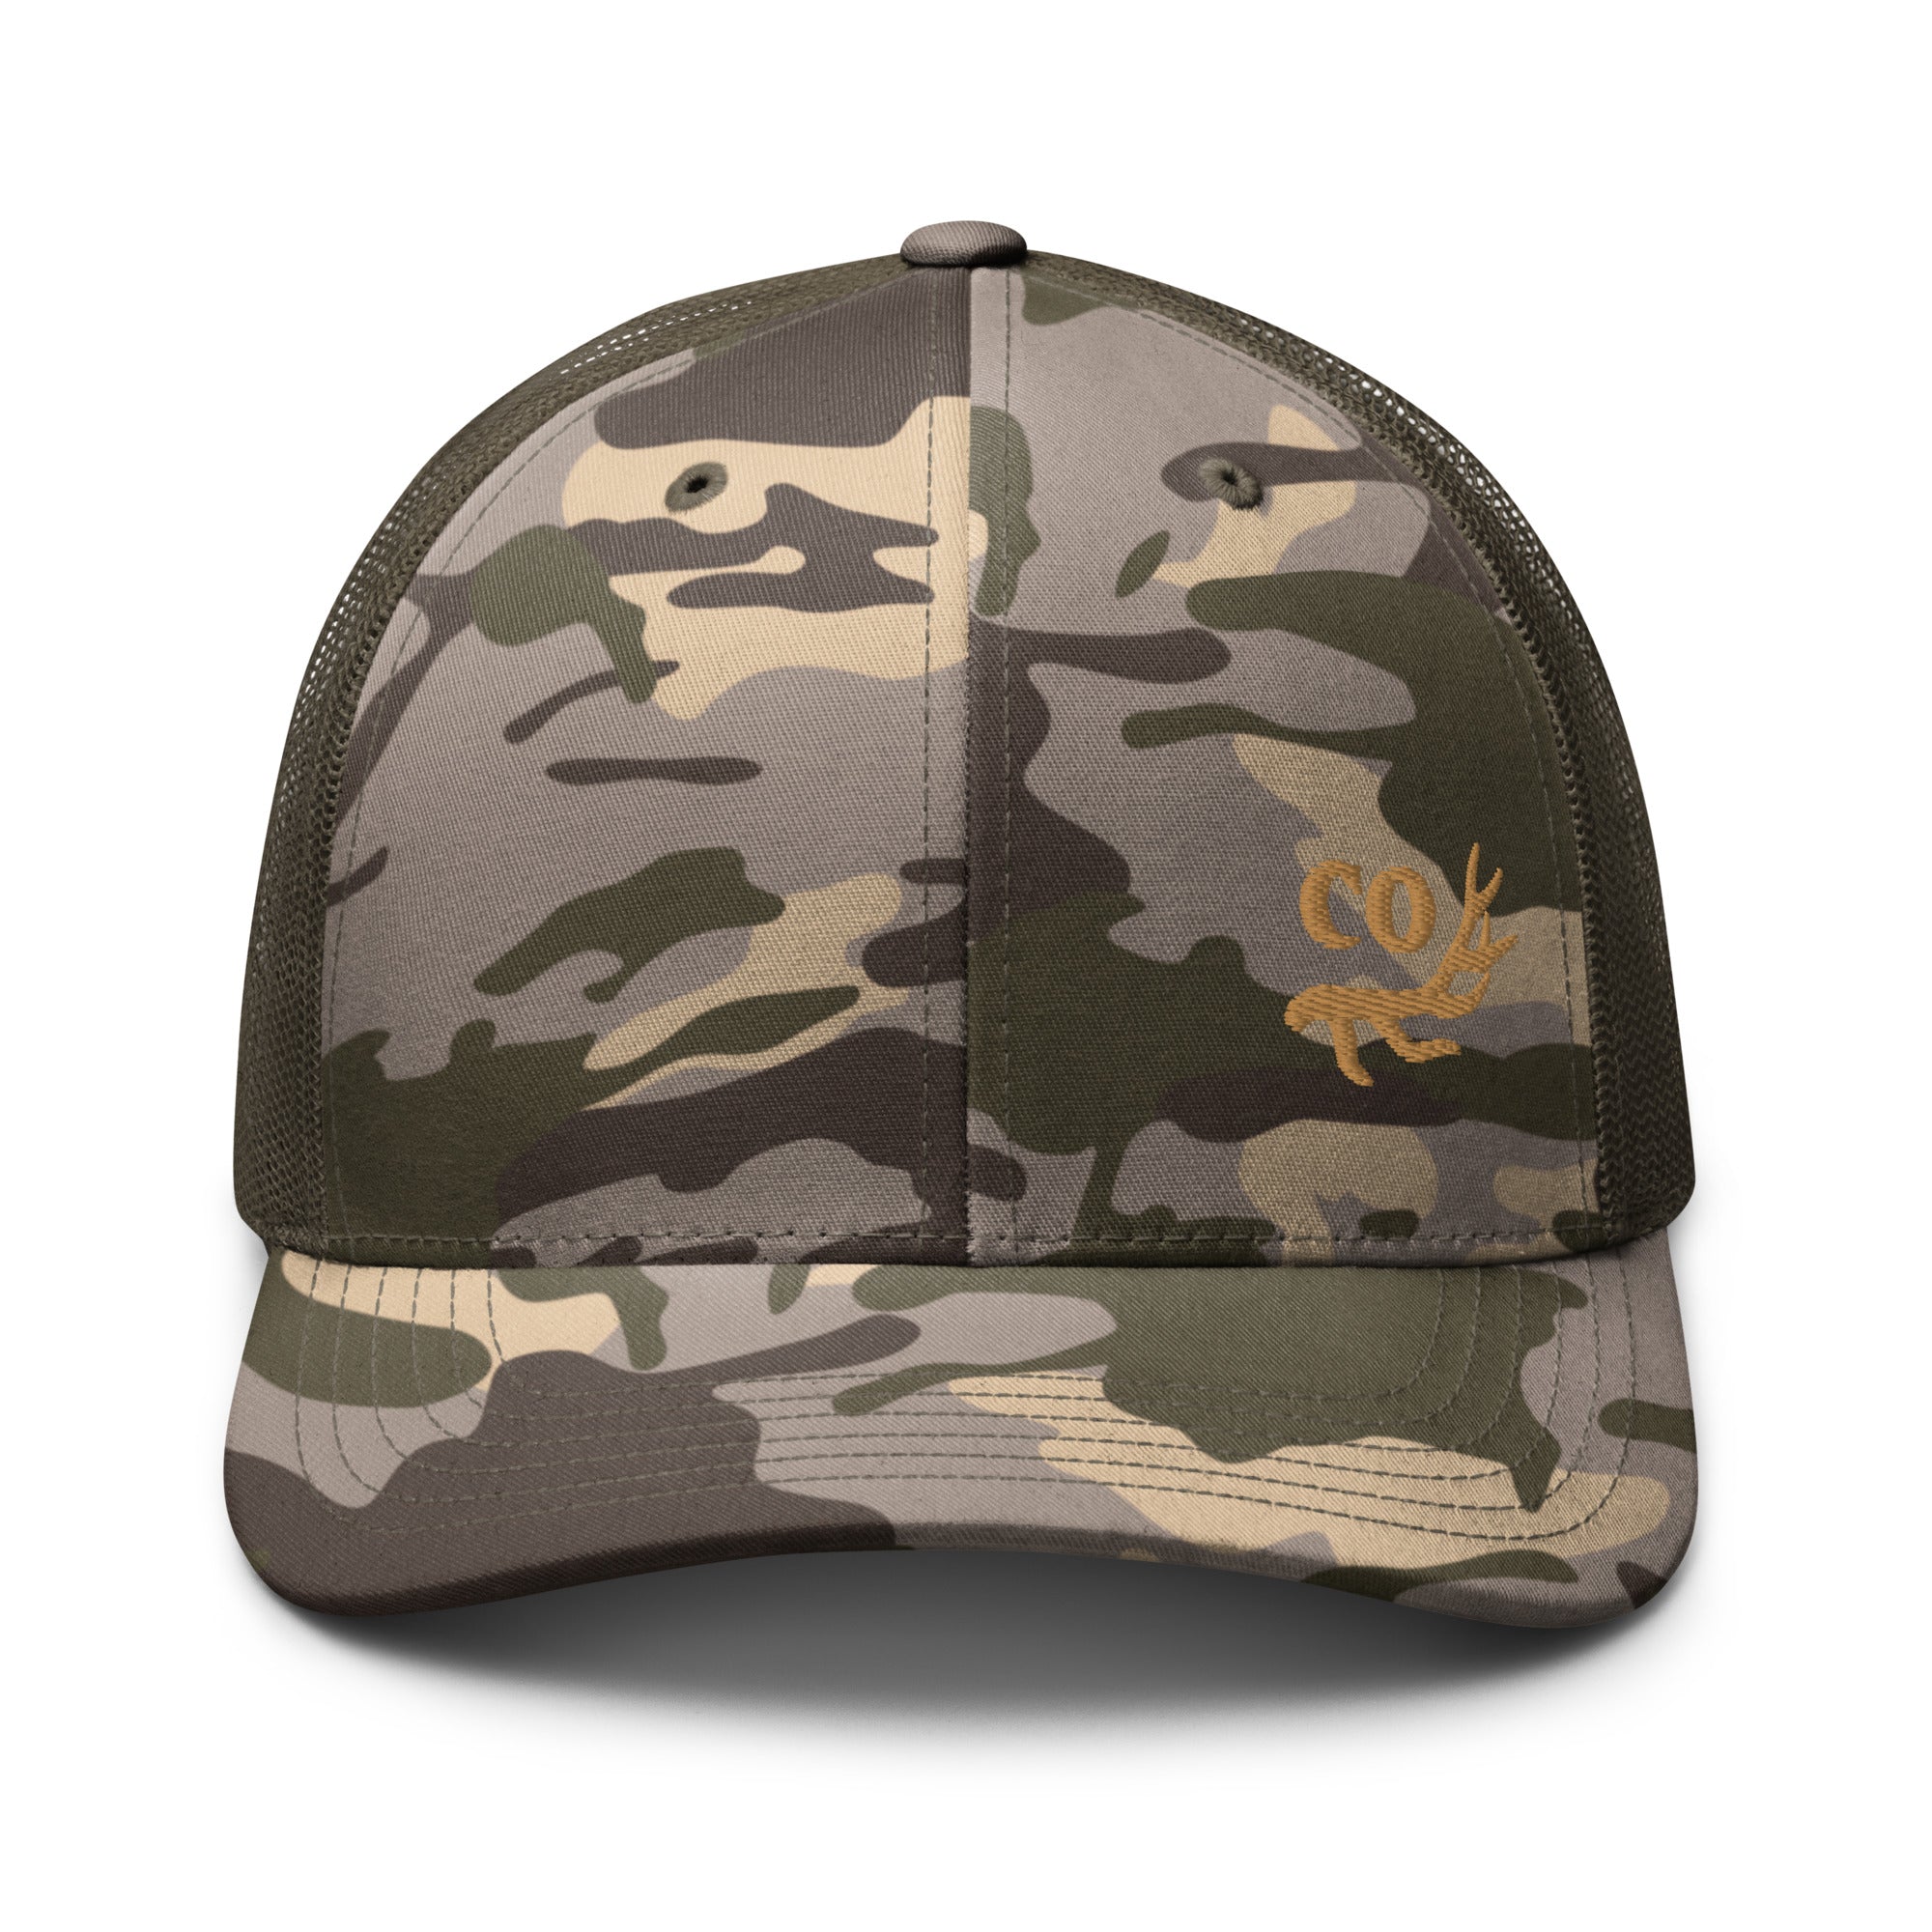 camouflage-trucker-hat-camo-olive-front-655e5f99d613a.jpg